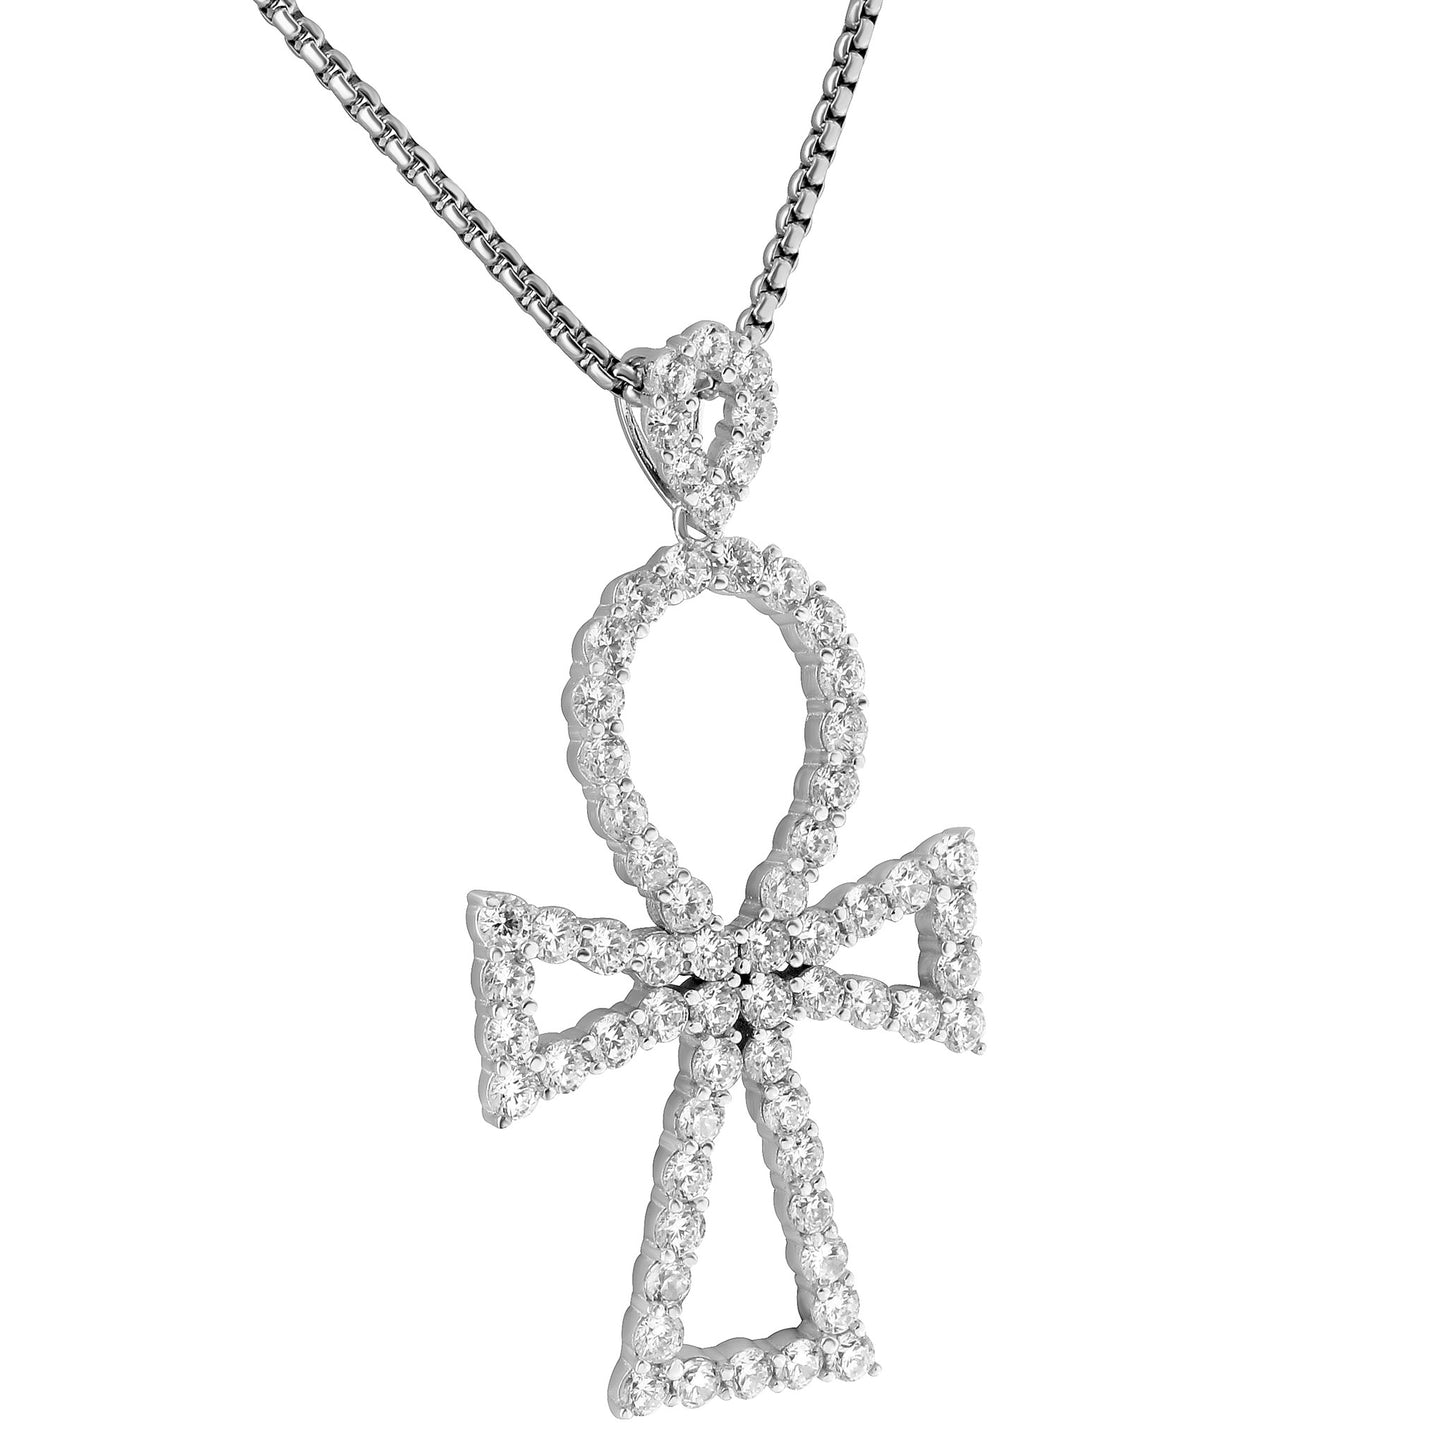 Solitaire Ankh Cross Pendant 2.4 Inch Lab Diamonds 925 Sterling Silver 24 Inch Chain